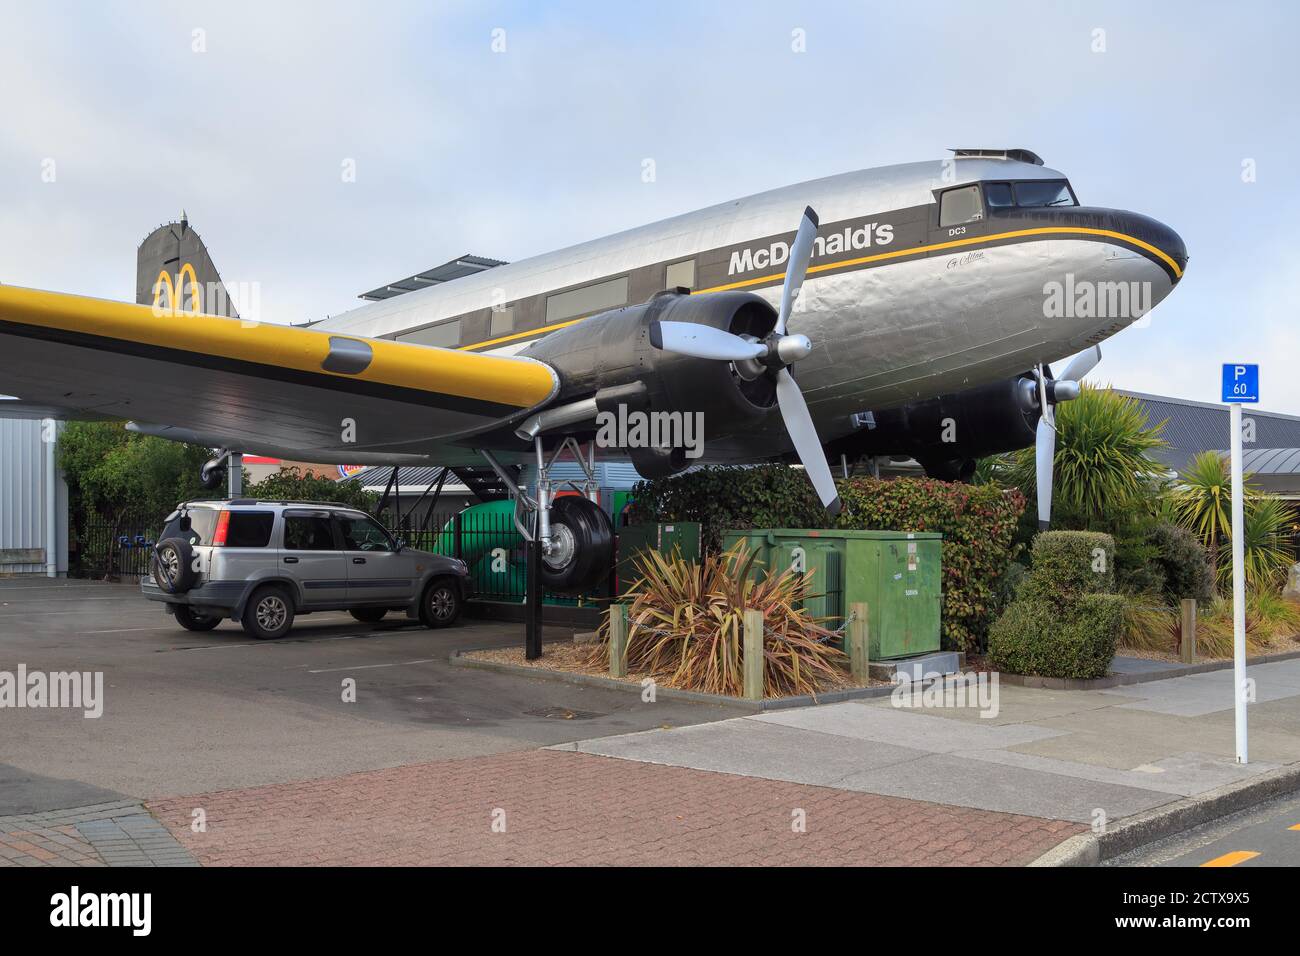 The 'McDonald's' plane in Taupo, New Zealand. This restaurant has a Douglas DC-3 outside, where customers can eat inside the fuselage. 5/23/2020 Stock Photo